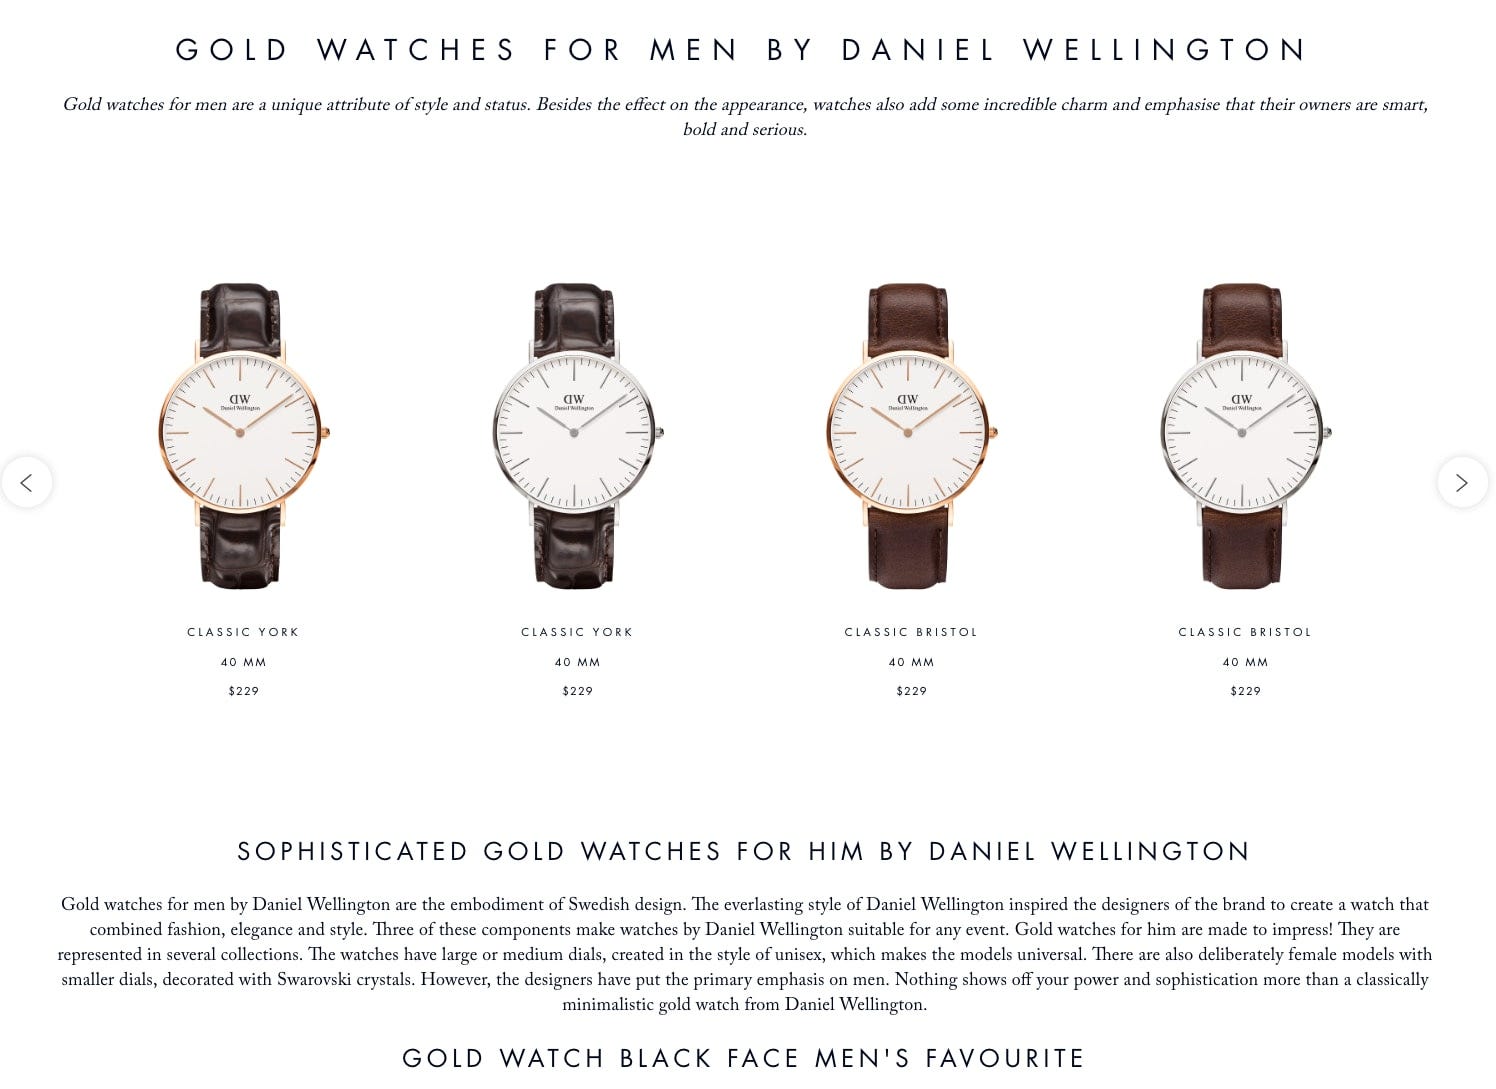 How Daniel Wellington Built A $228 Global Fashion Empire With A Tiny Investment [Detailed Case Study] | by Max Andersson | Medium